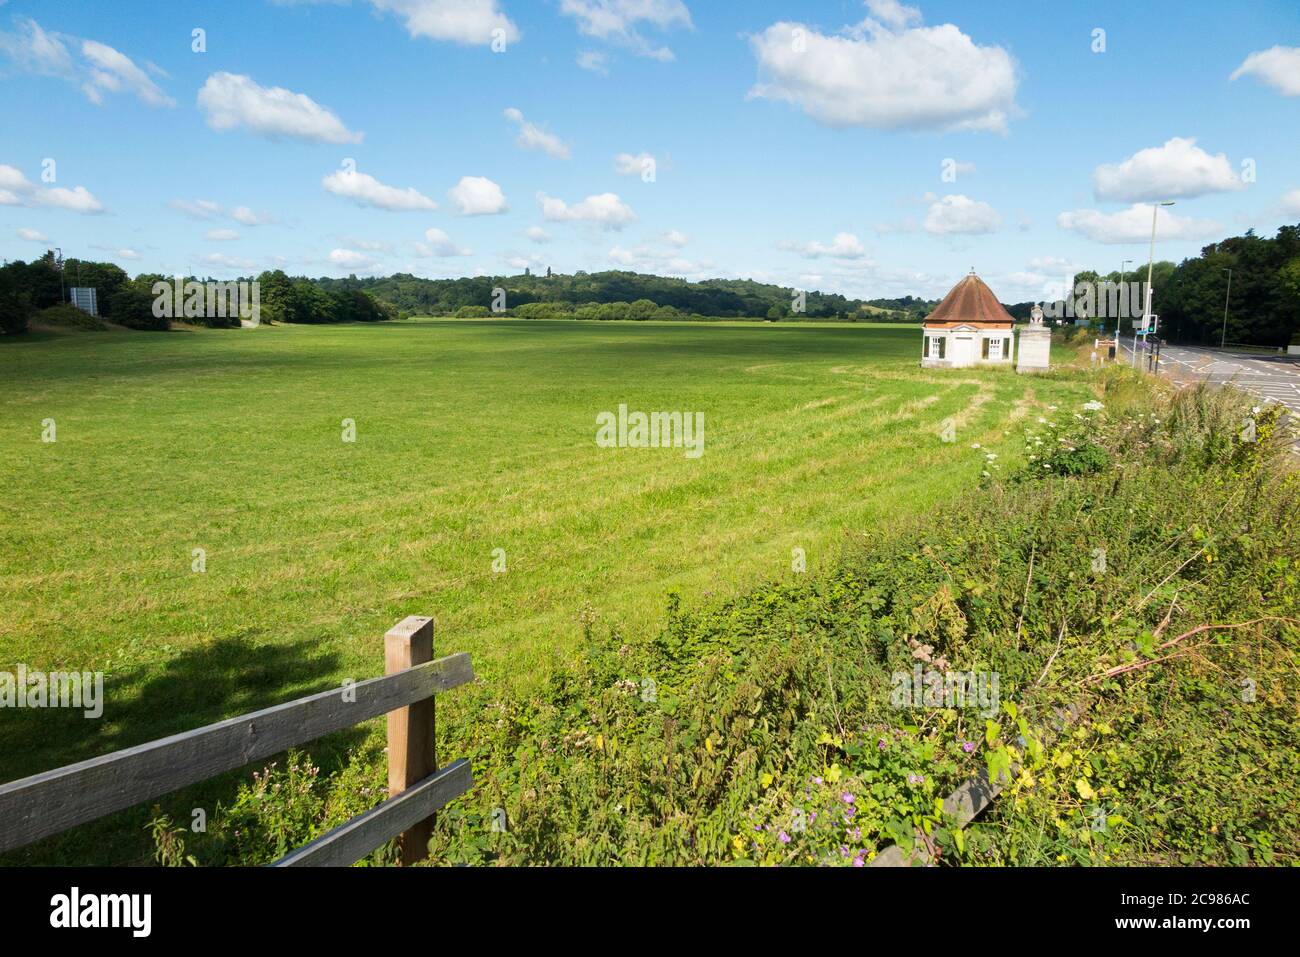 Runnymede meadows & flood plain, site of the signing of Magna Carta in year 1215 by King John & the English Barons. Bright and sunny summer day. Surrey UK (119) Stock Photo